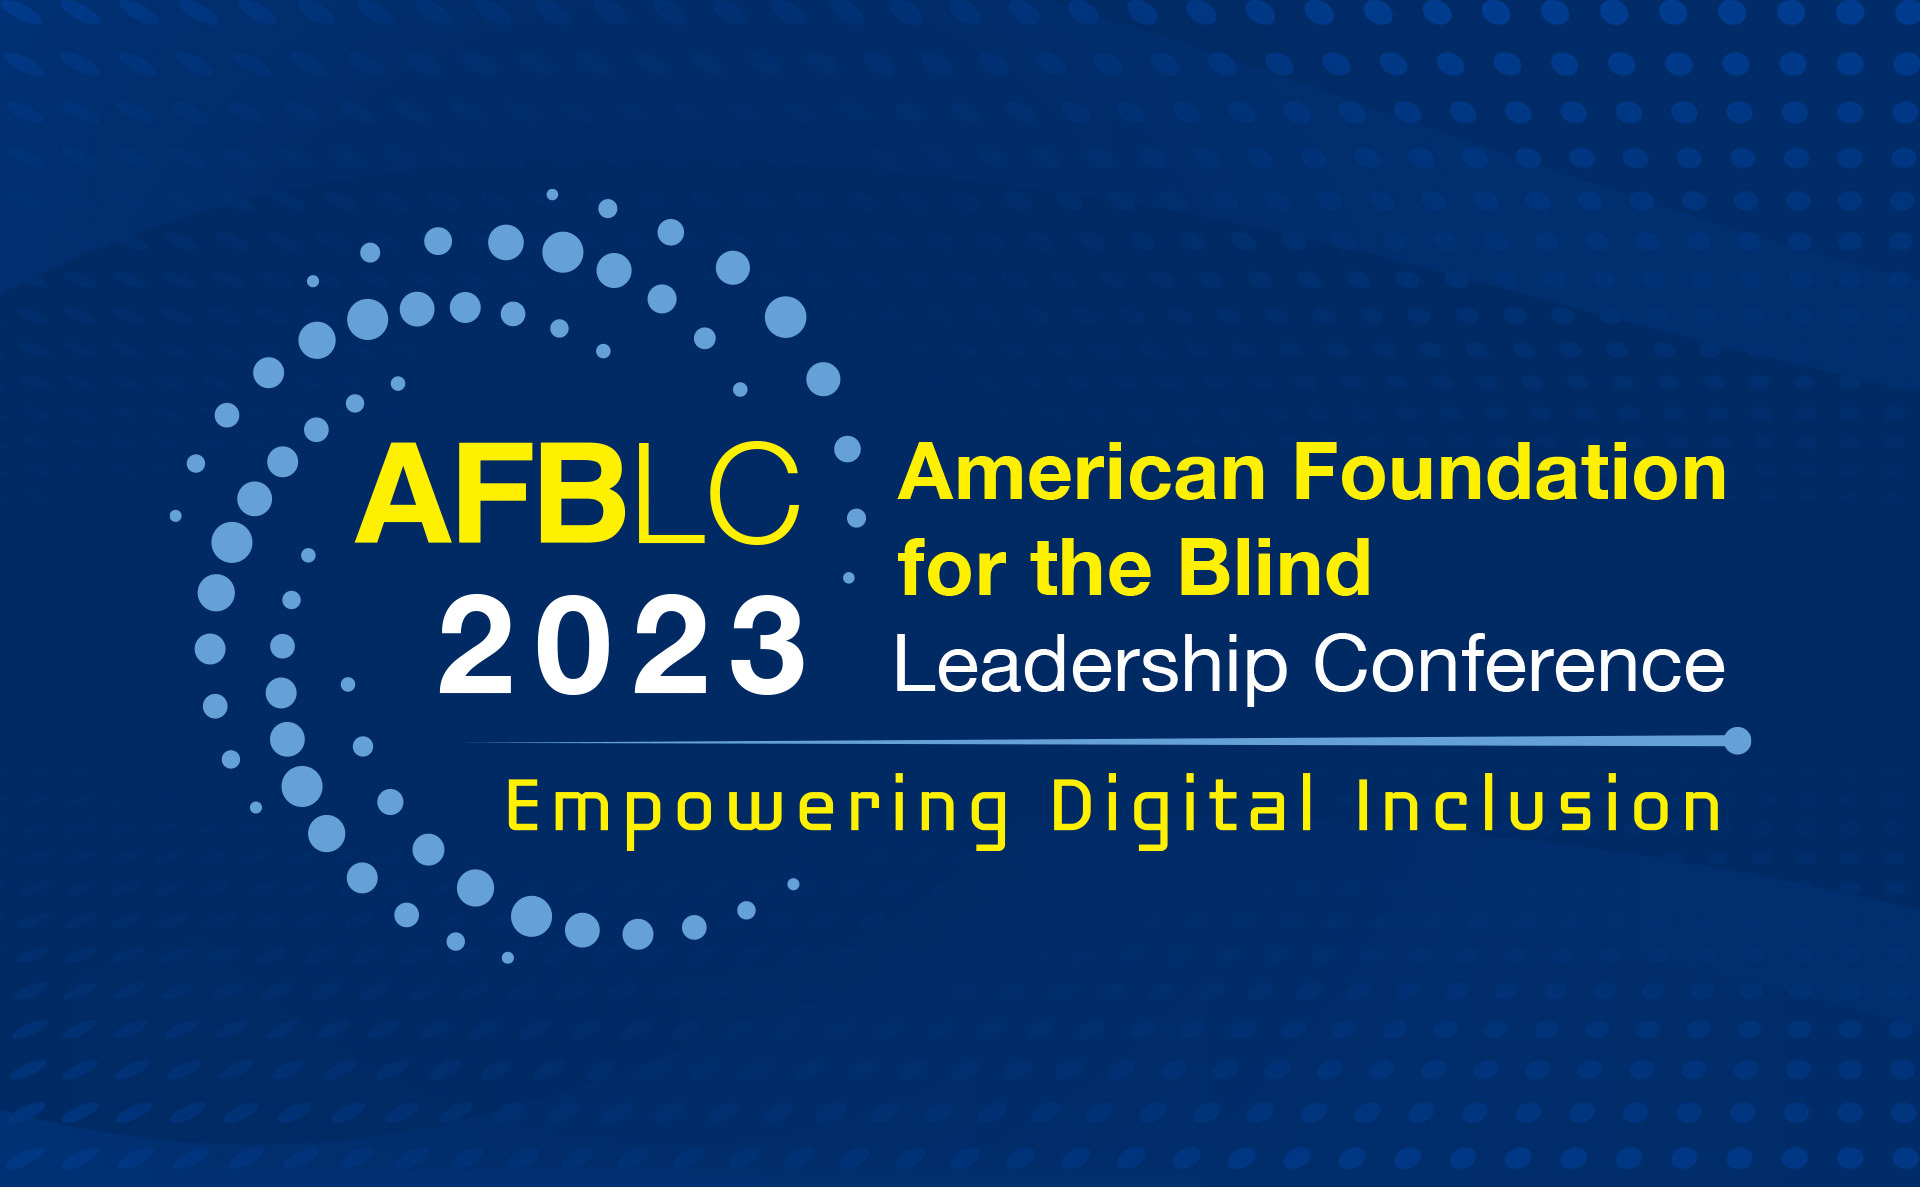 AFBLC event logo. It has "Empowering Digital Inclusion" tag lined. It has AFBLC 2023 logo on it which is a spiral wrapped around the logo. The 